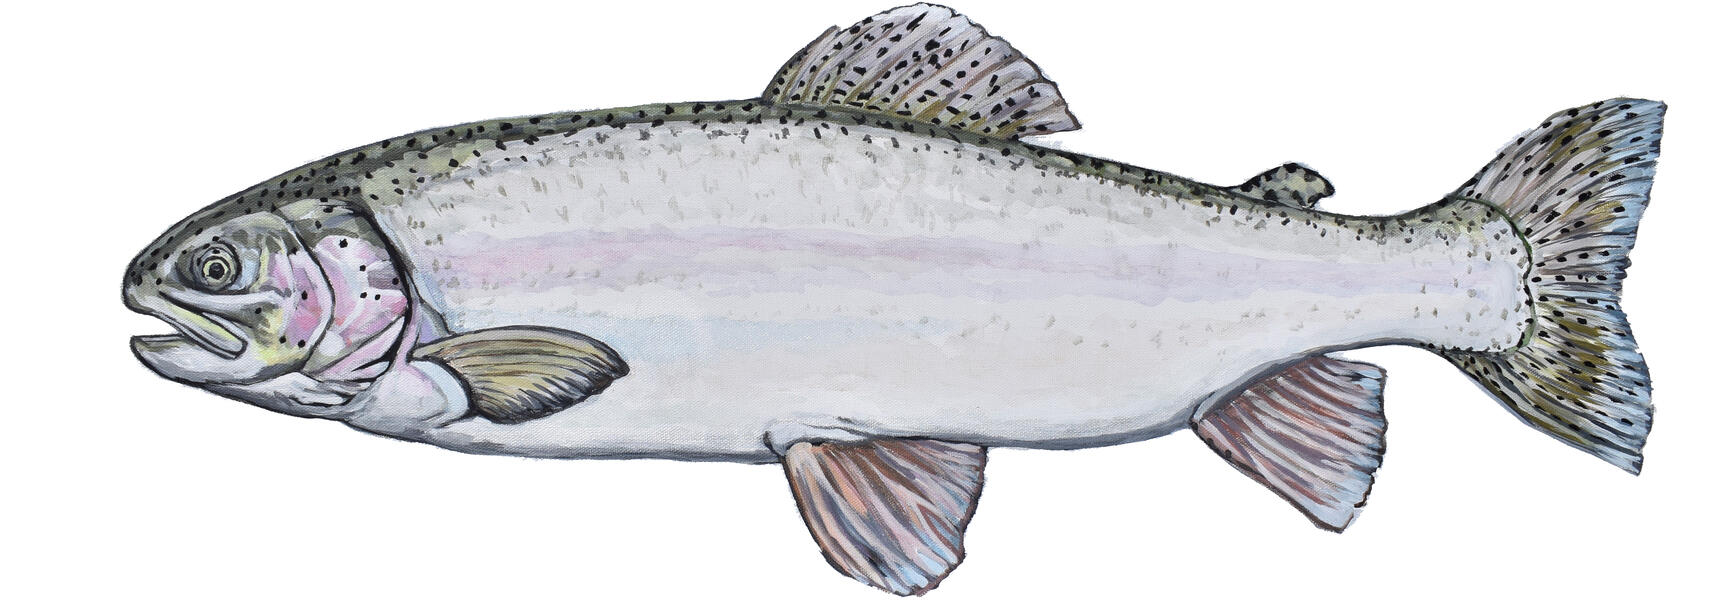 Rainbow Trout Painting by Collin Cessna